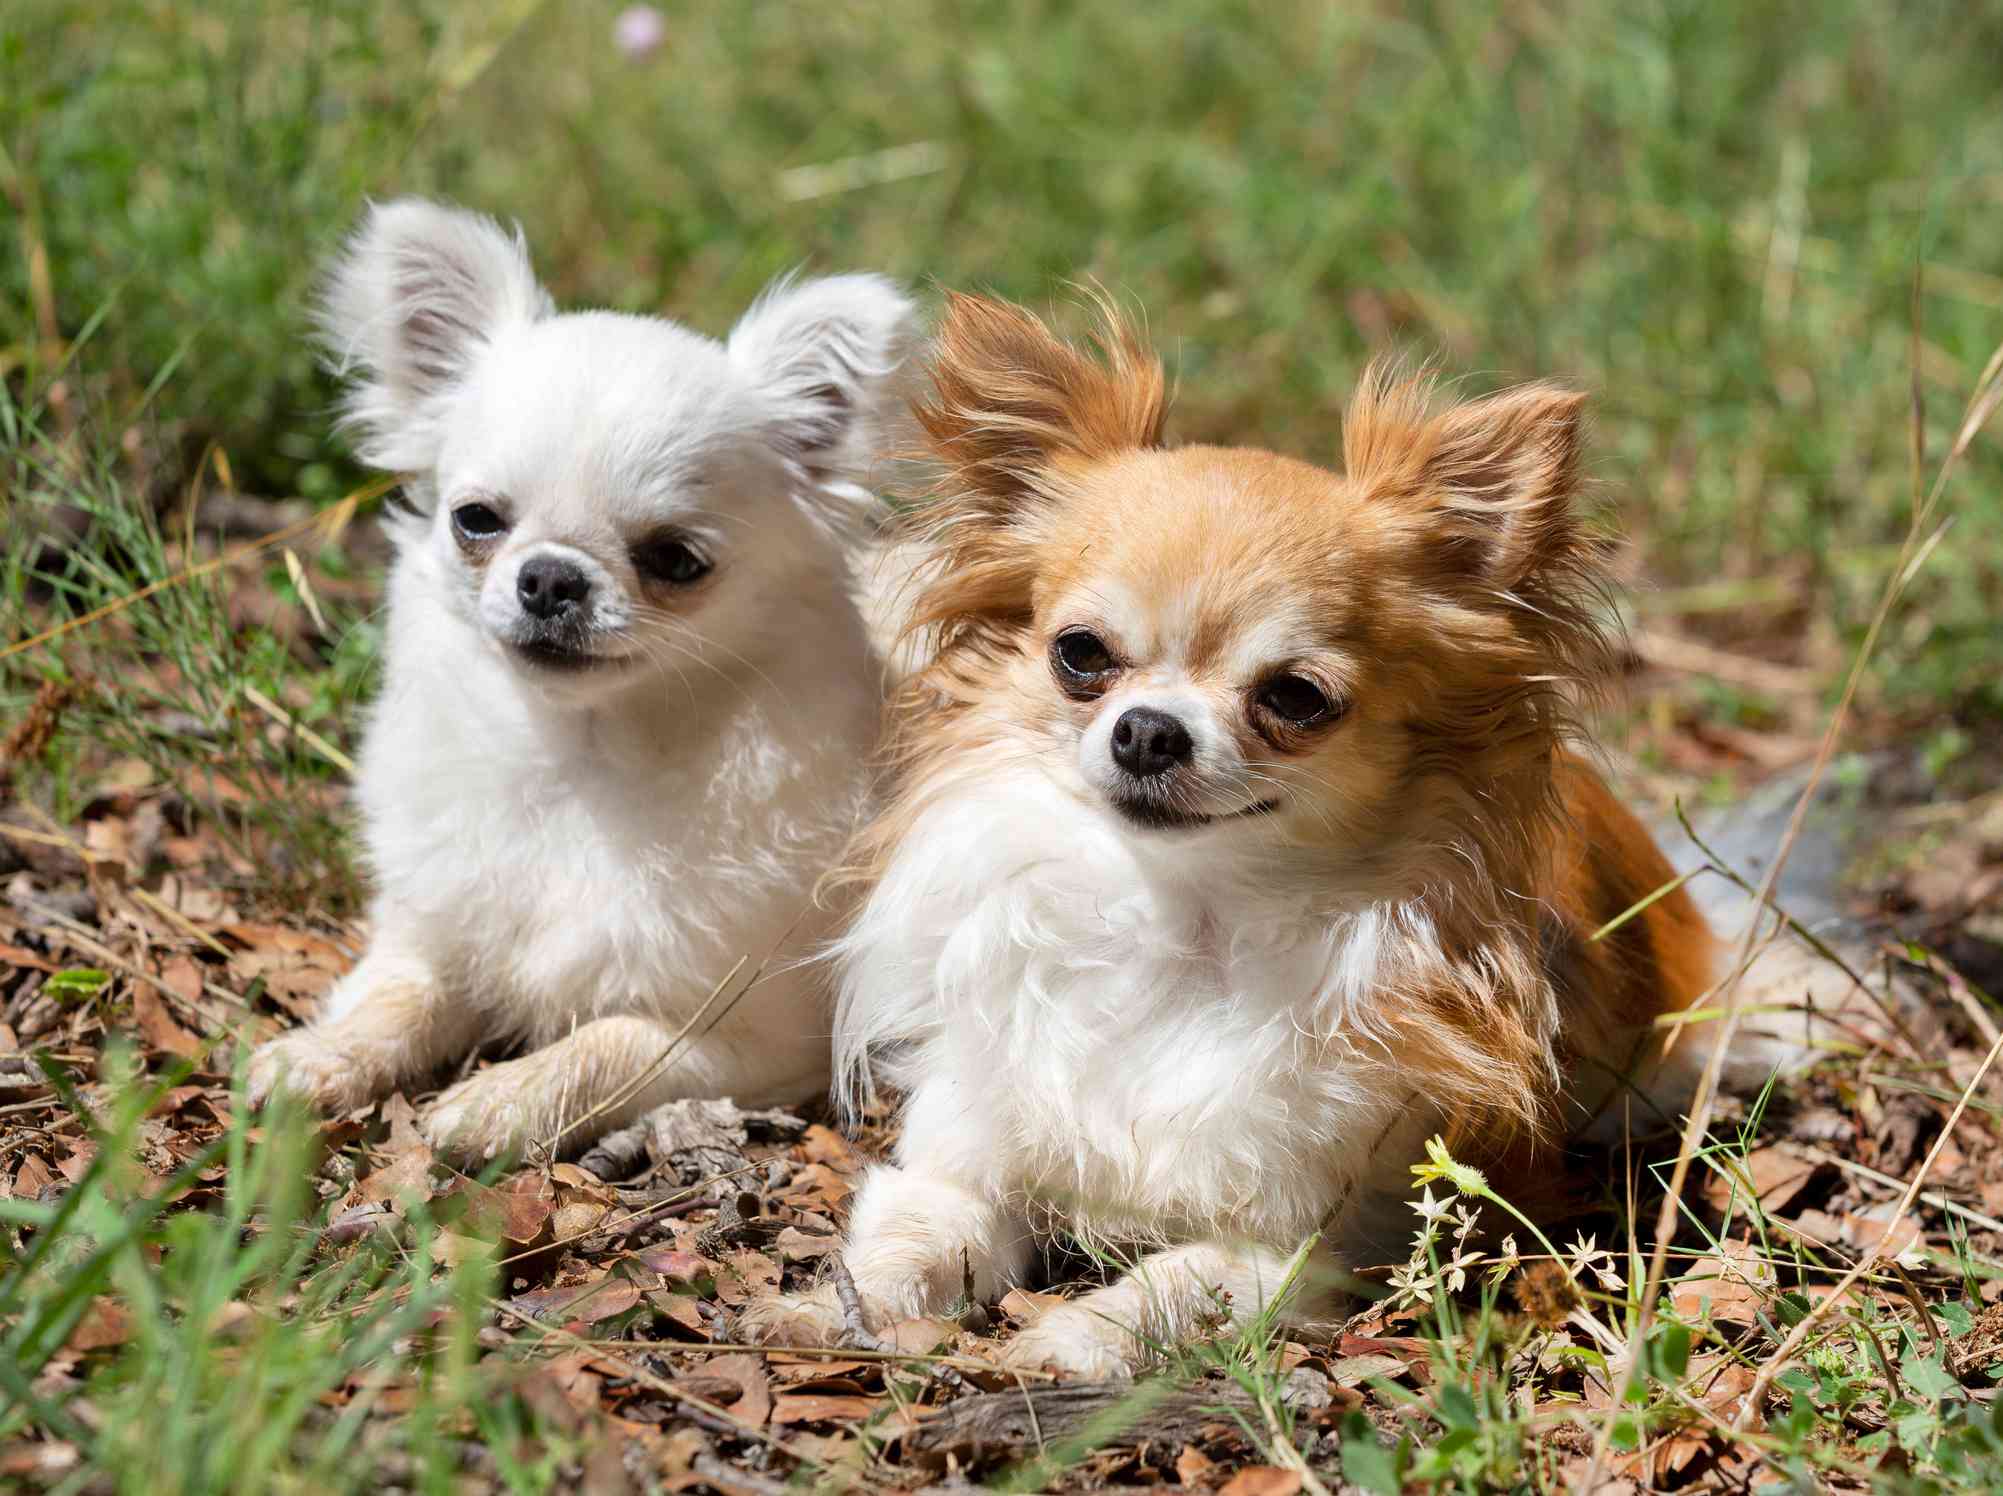 Two long-haired Chihuahuas sitting outside.